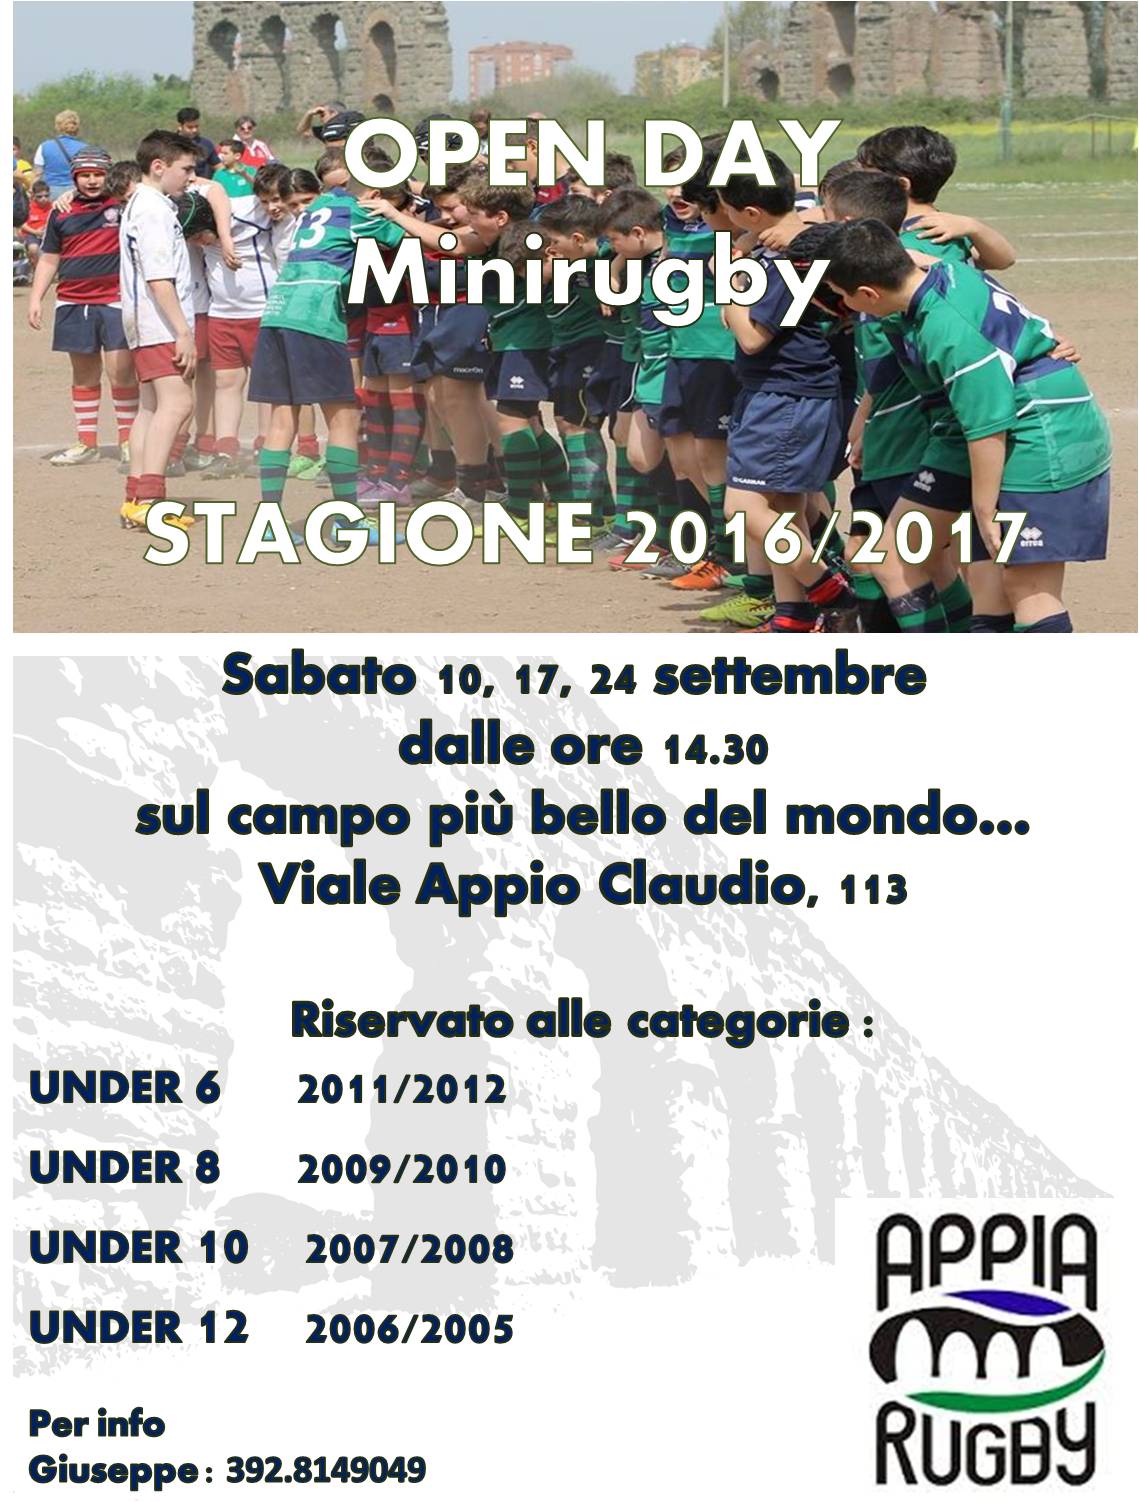 Stagione 2016/2017 – Open Day Minirugby